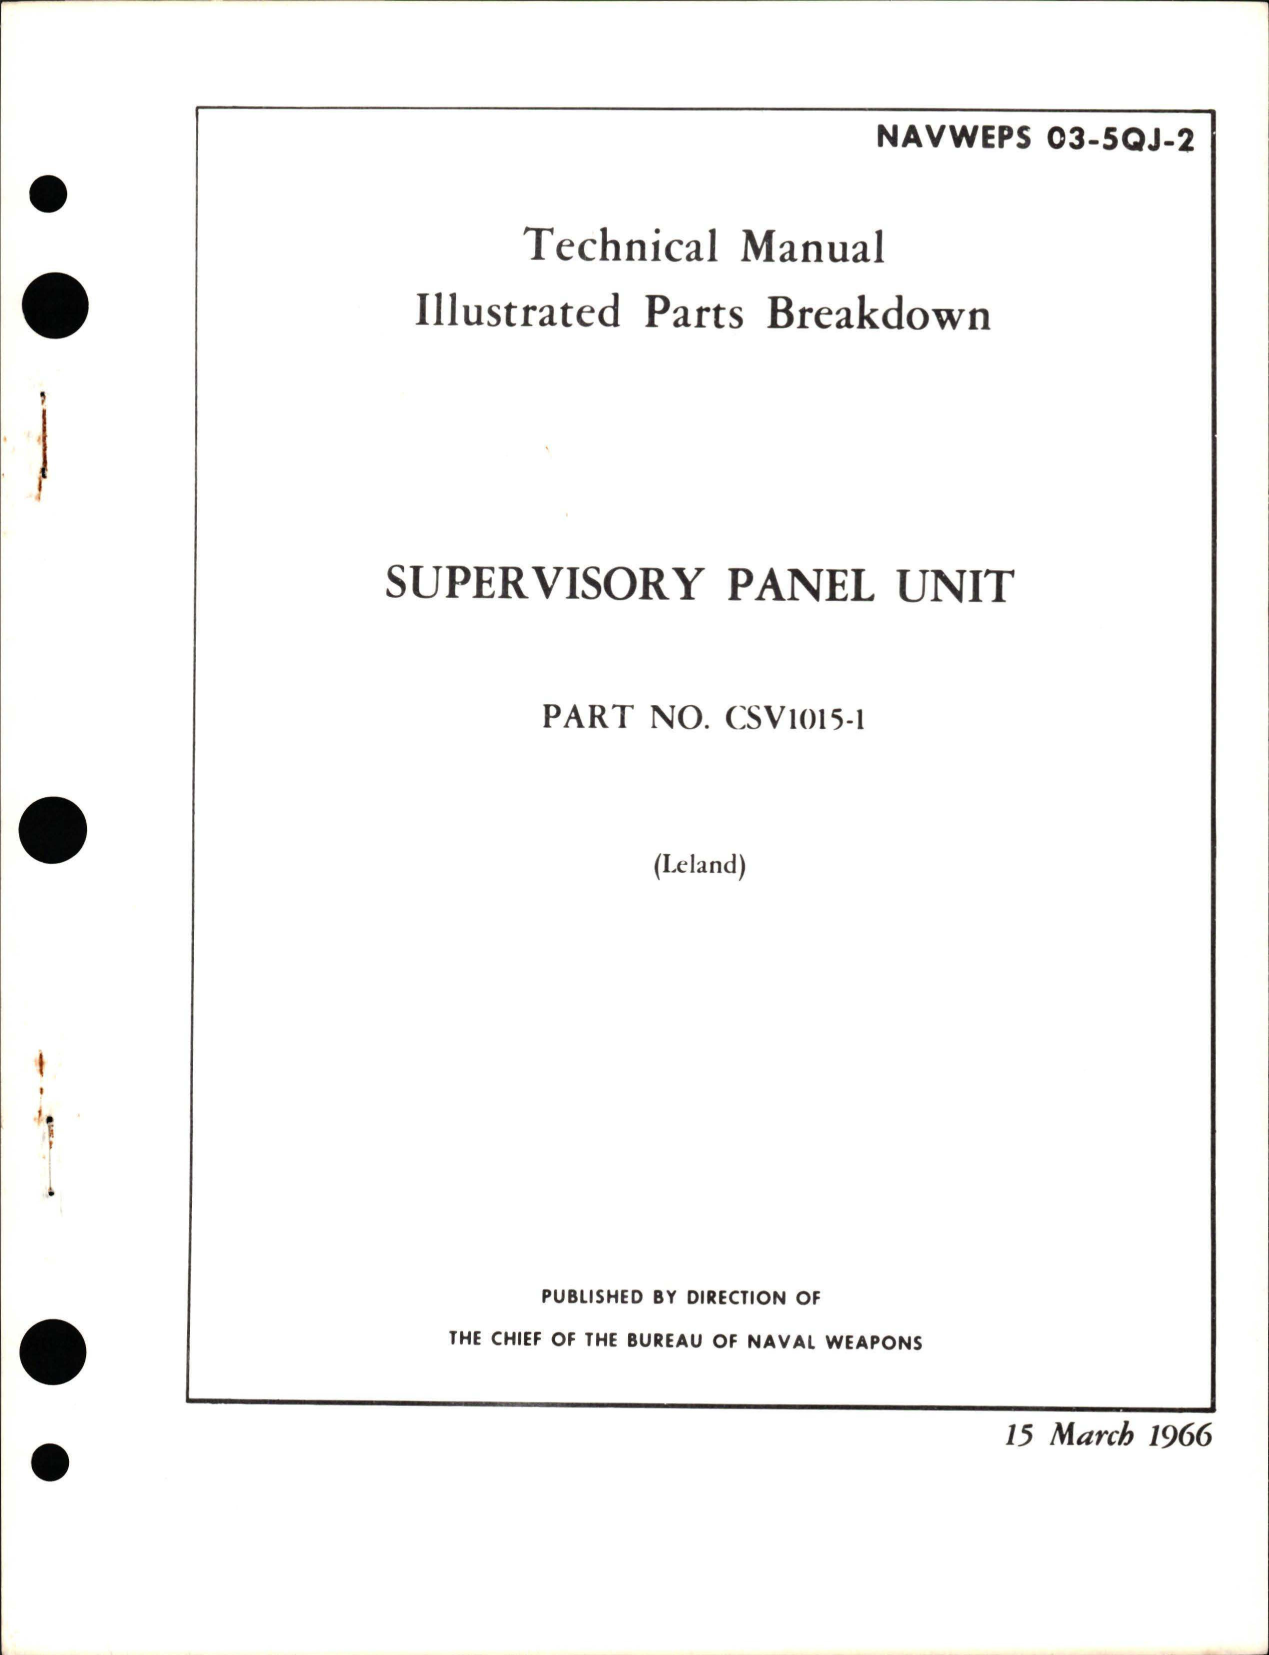 Sample page 1 from AirCorps Library document: Illustrated Parts Breakdown for Supervisory Panel Unit - Part CSV1015-1